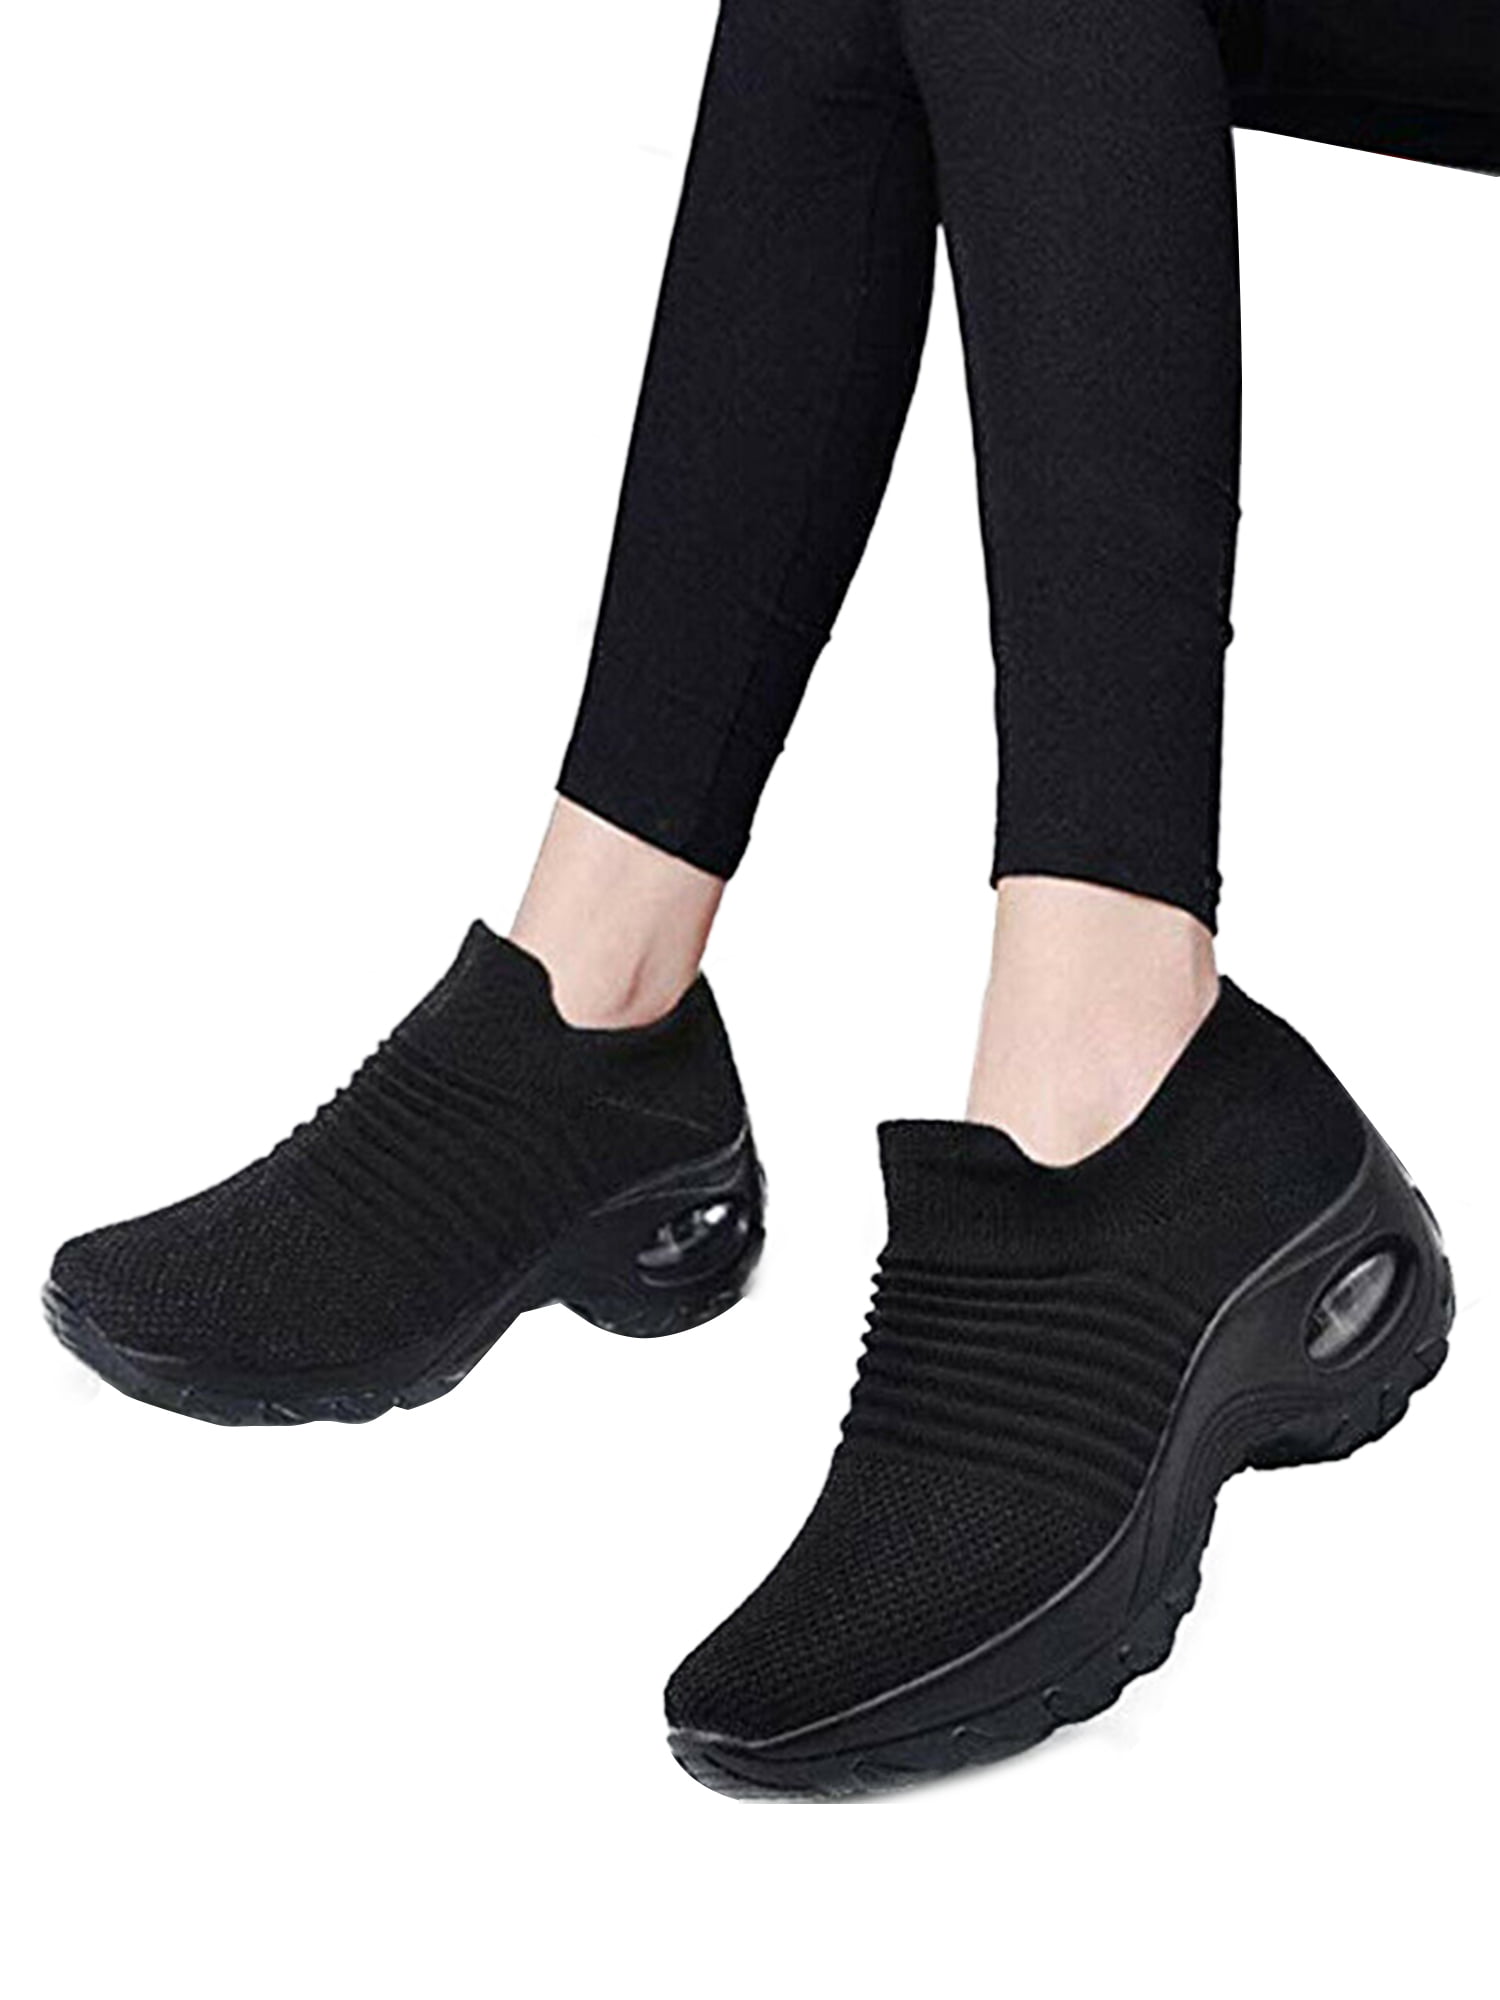 Lady's Soft Sport Shoes Gym Air Cushion Sneakers Slip On Running Walking Shoes' 